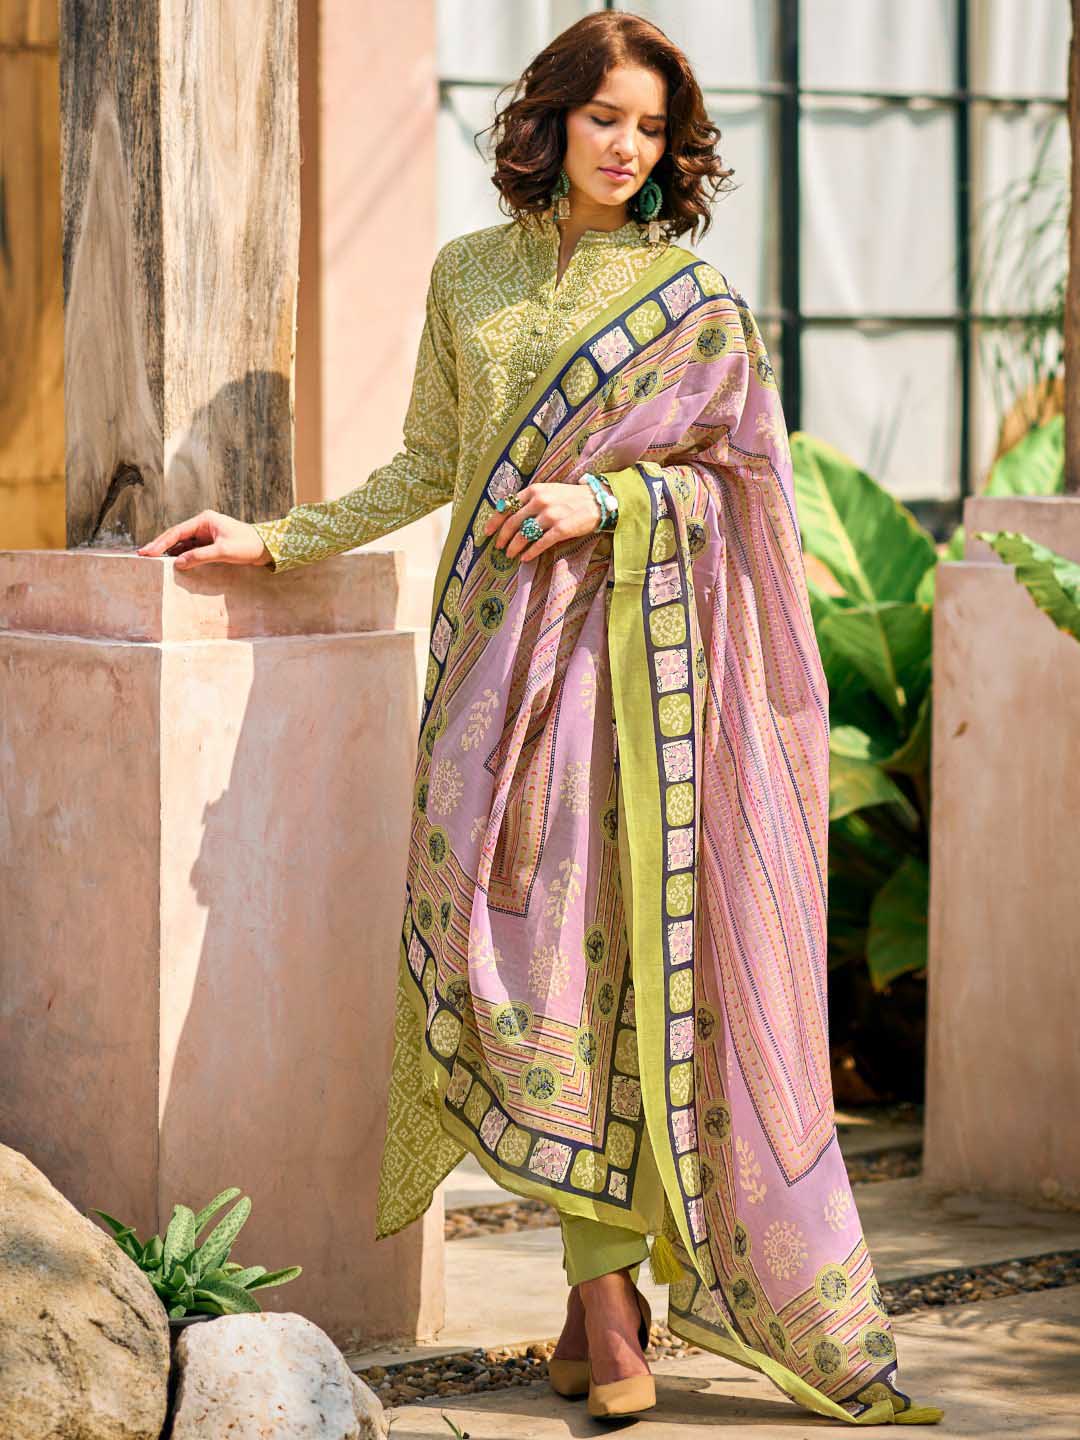 Unstitched Pure Lawn Cotton Green Suit Material with Embroidery